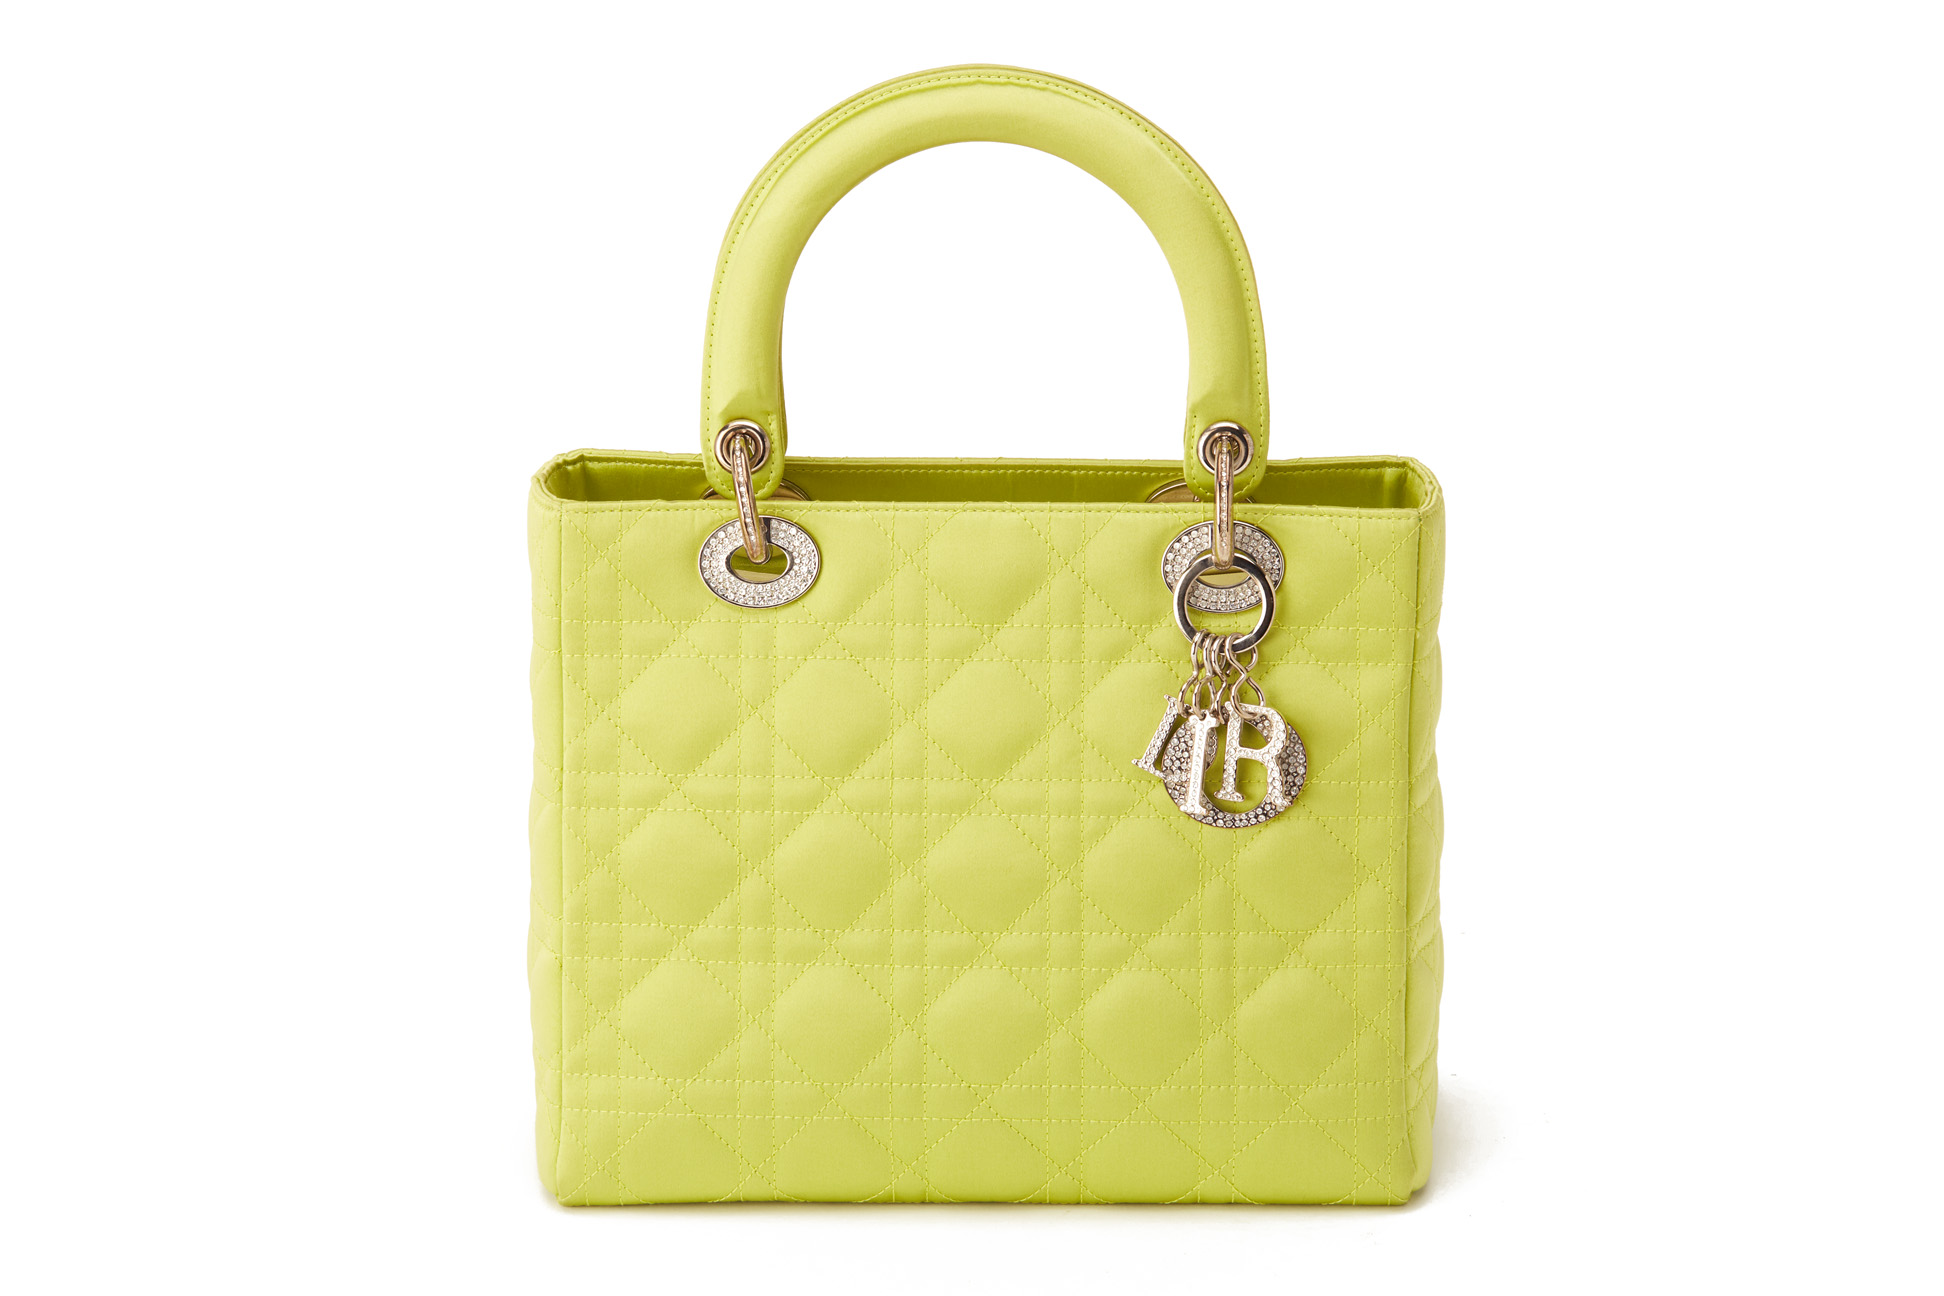 A CHRISTIAN DIOR QUILTED GREEN SATIN MEDIUM LADY DIOR